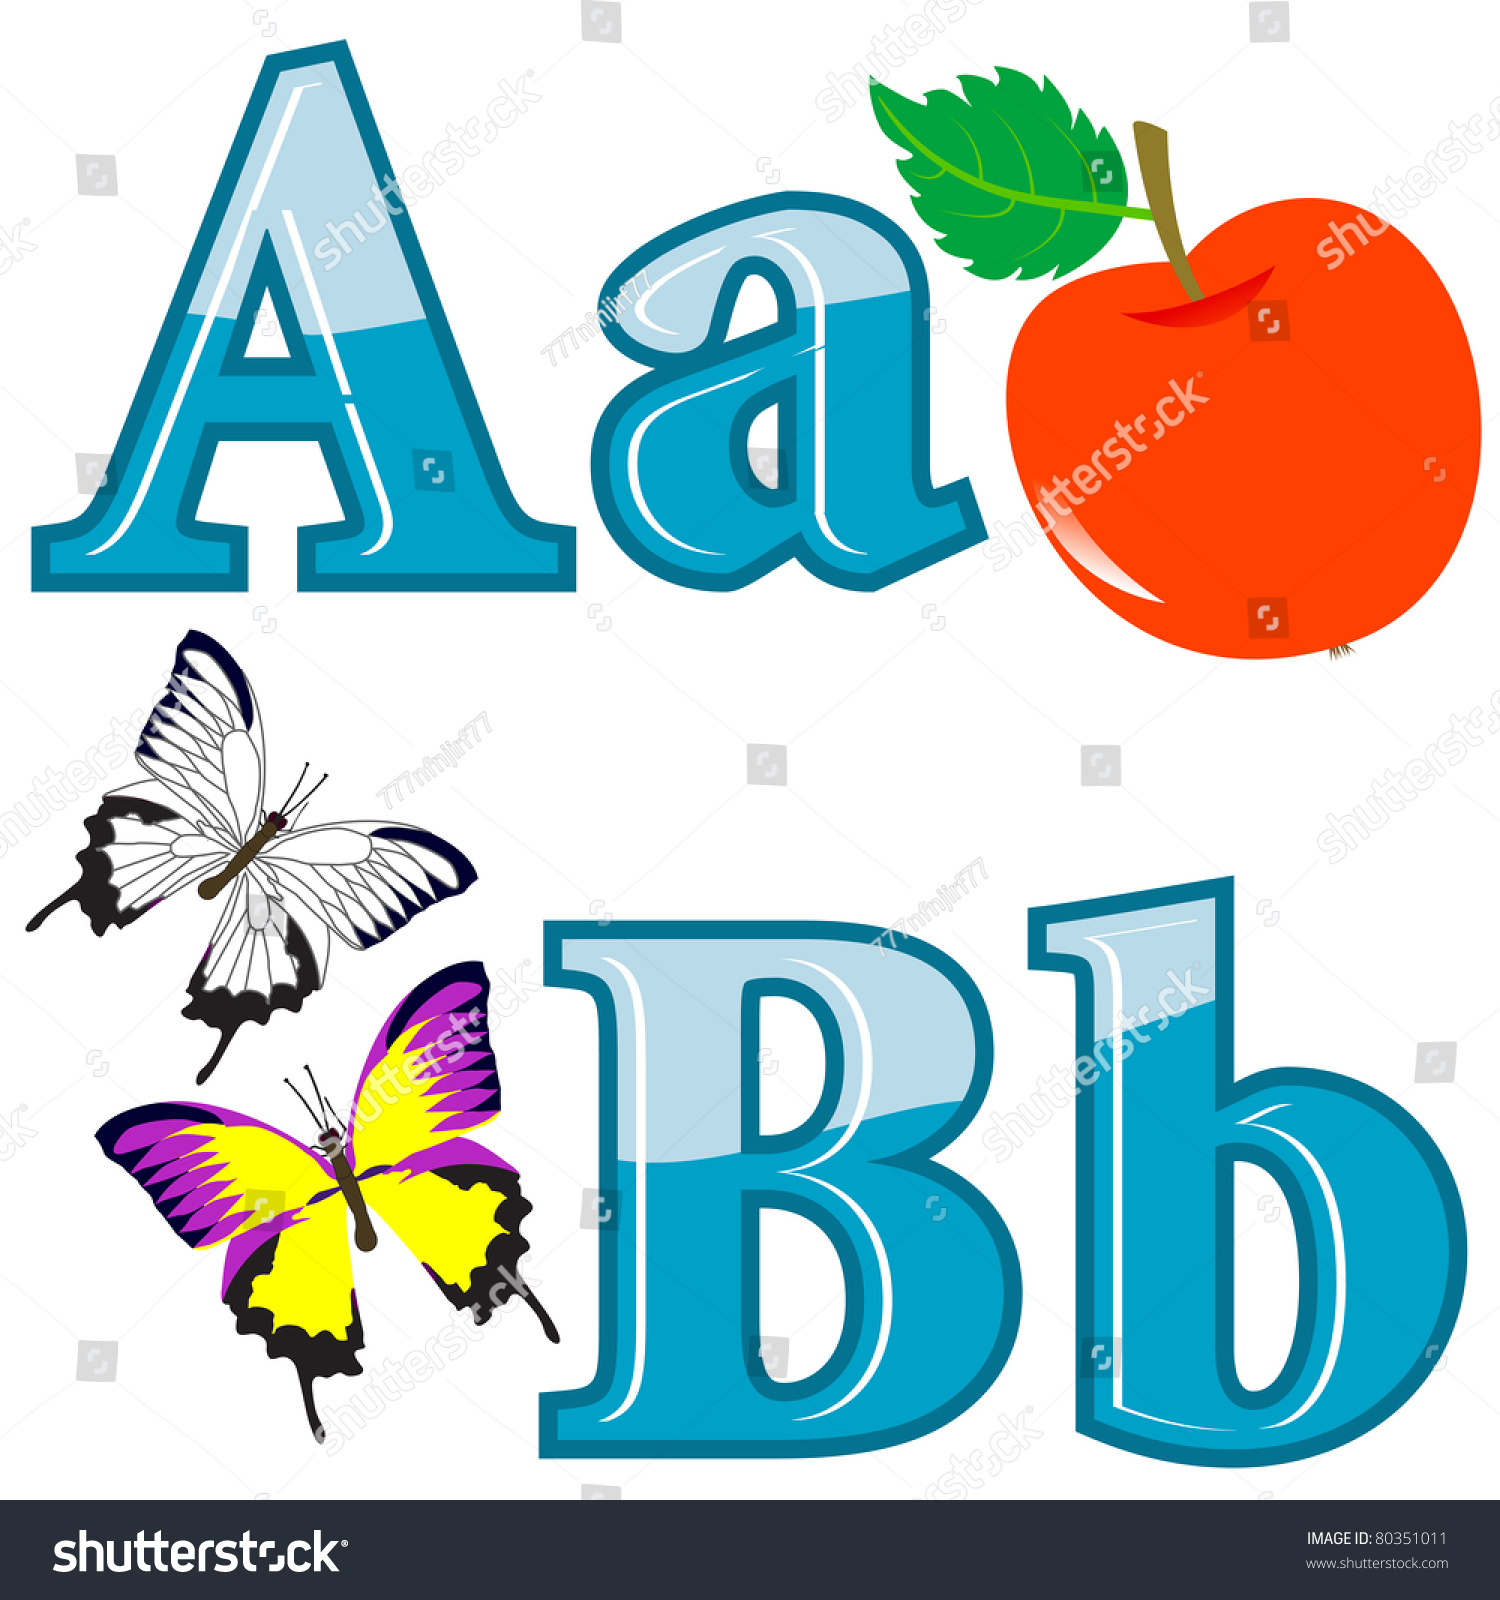 The English Alphabet With Funny Pictures. Letters A; B. Vector ...